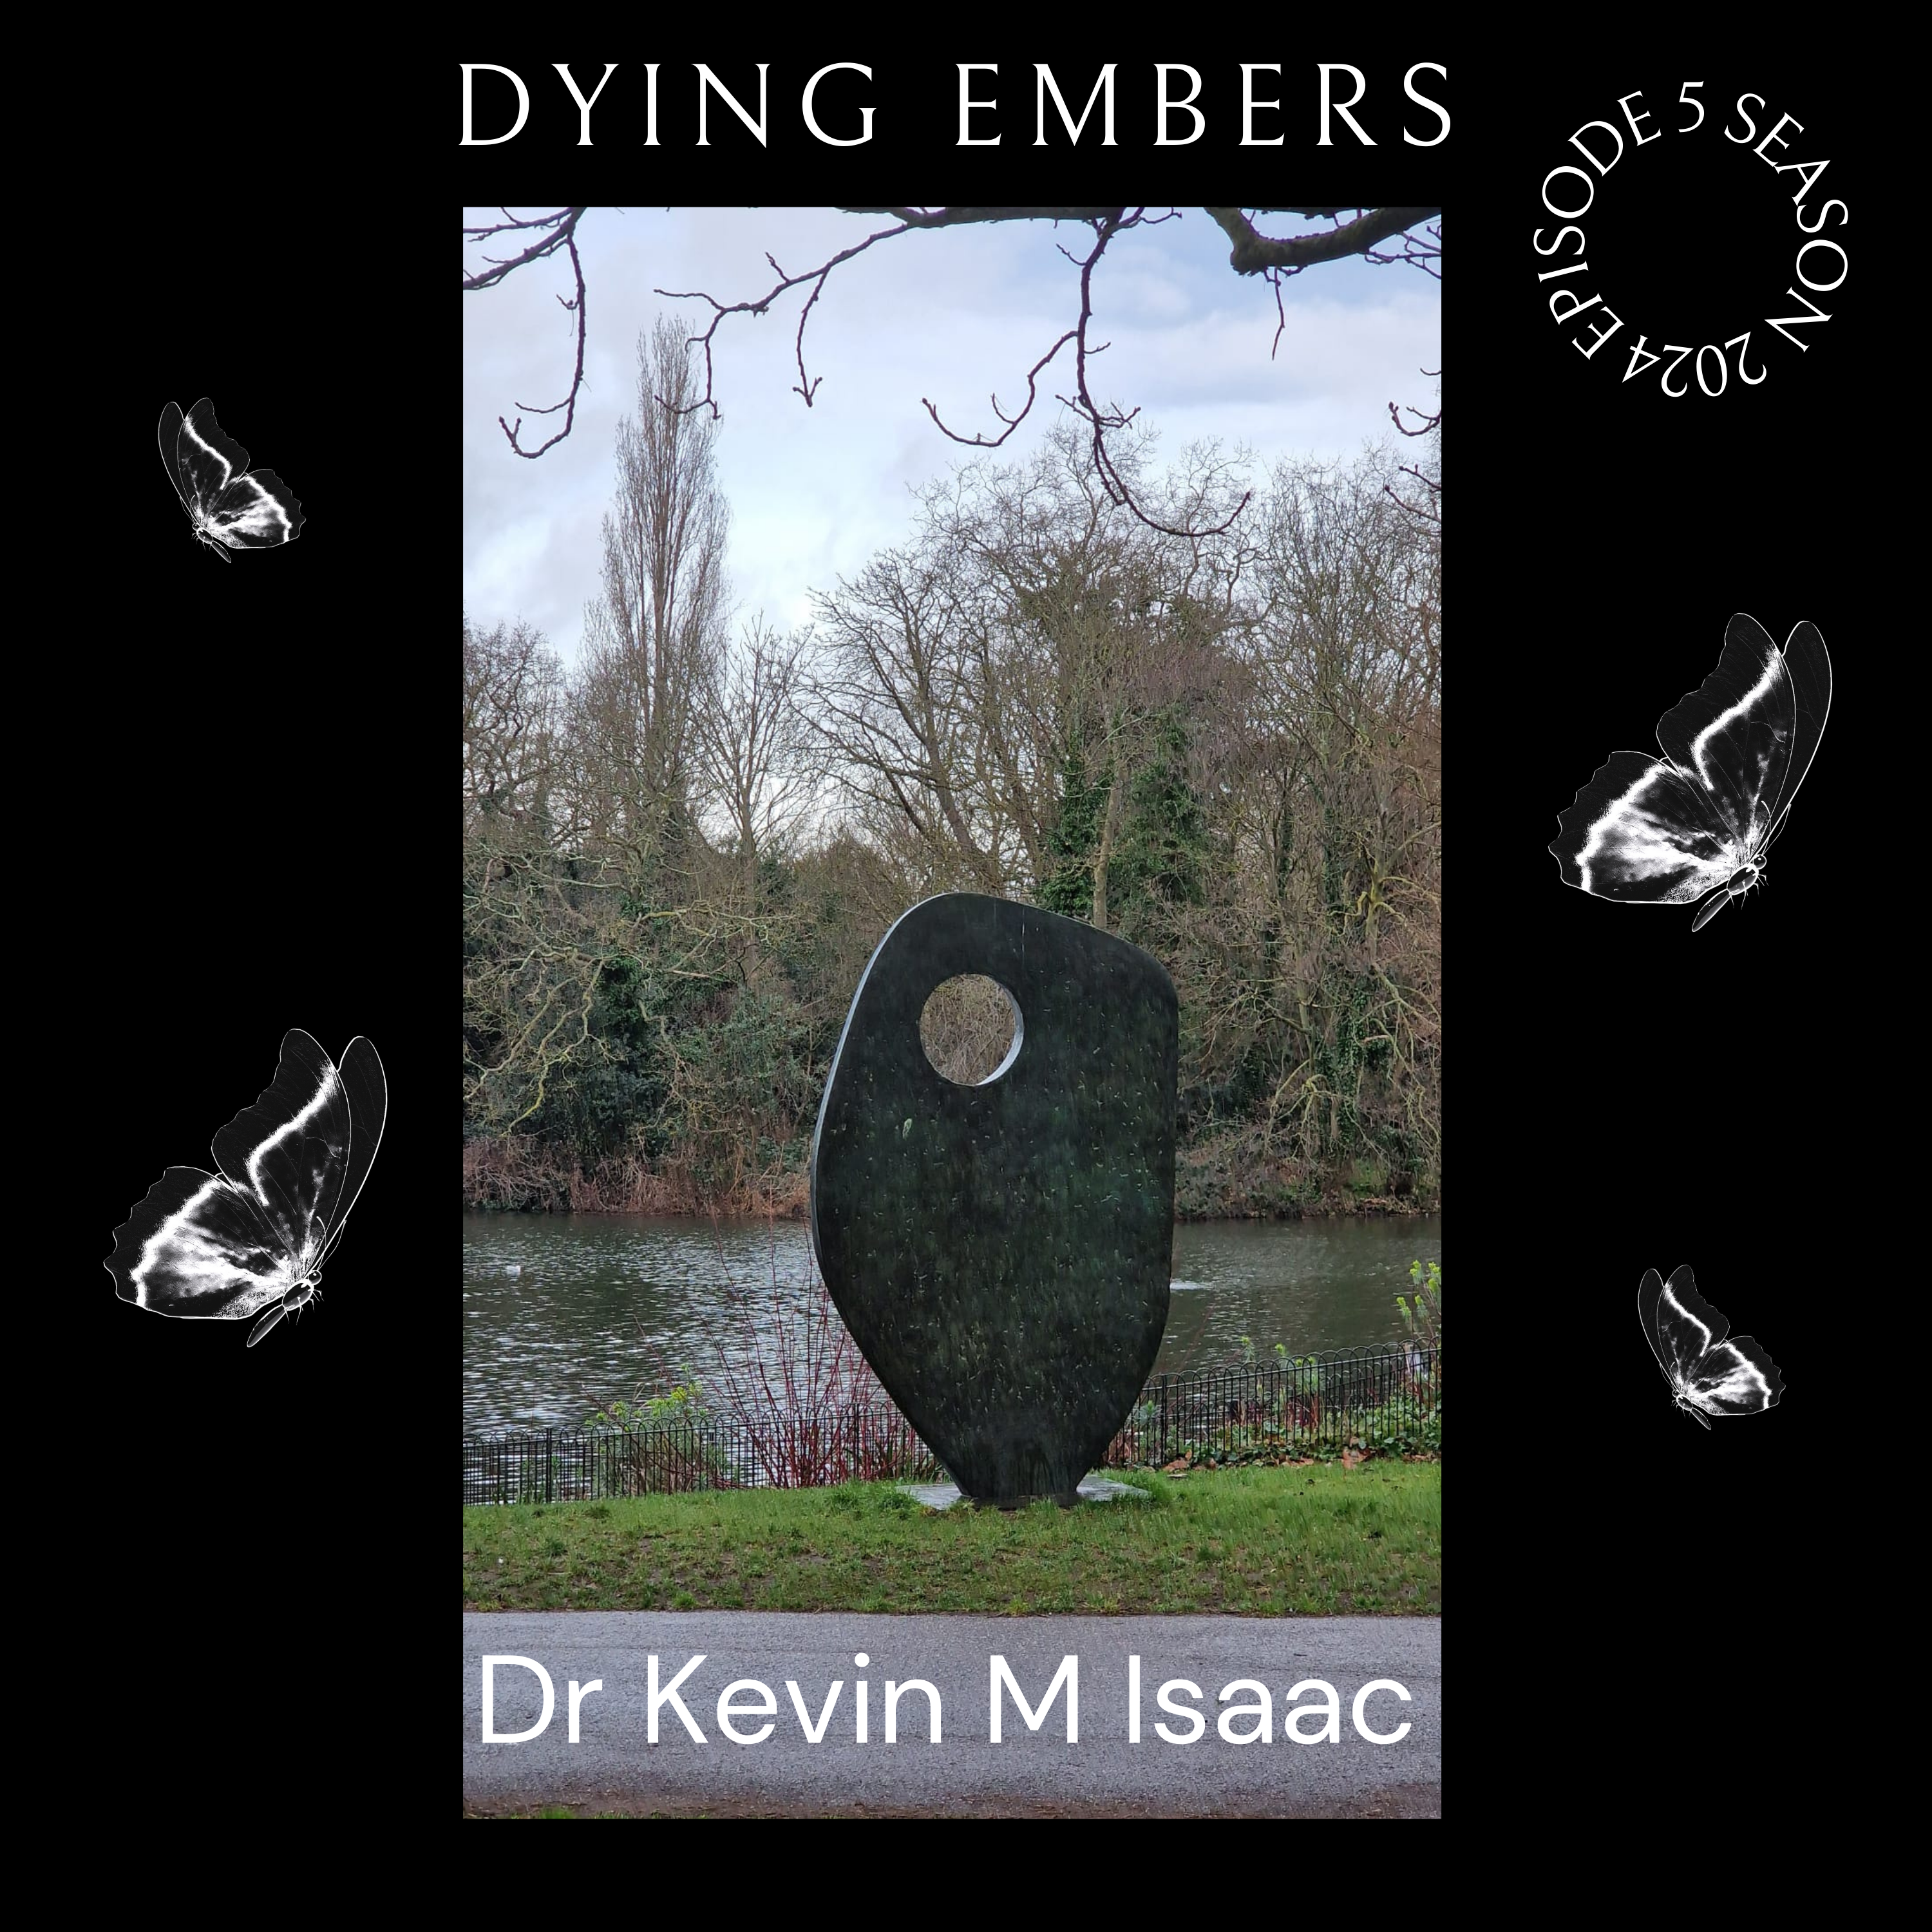 Dying embers